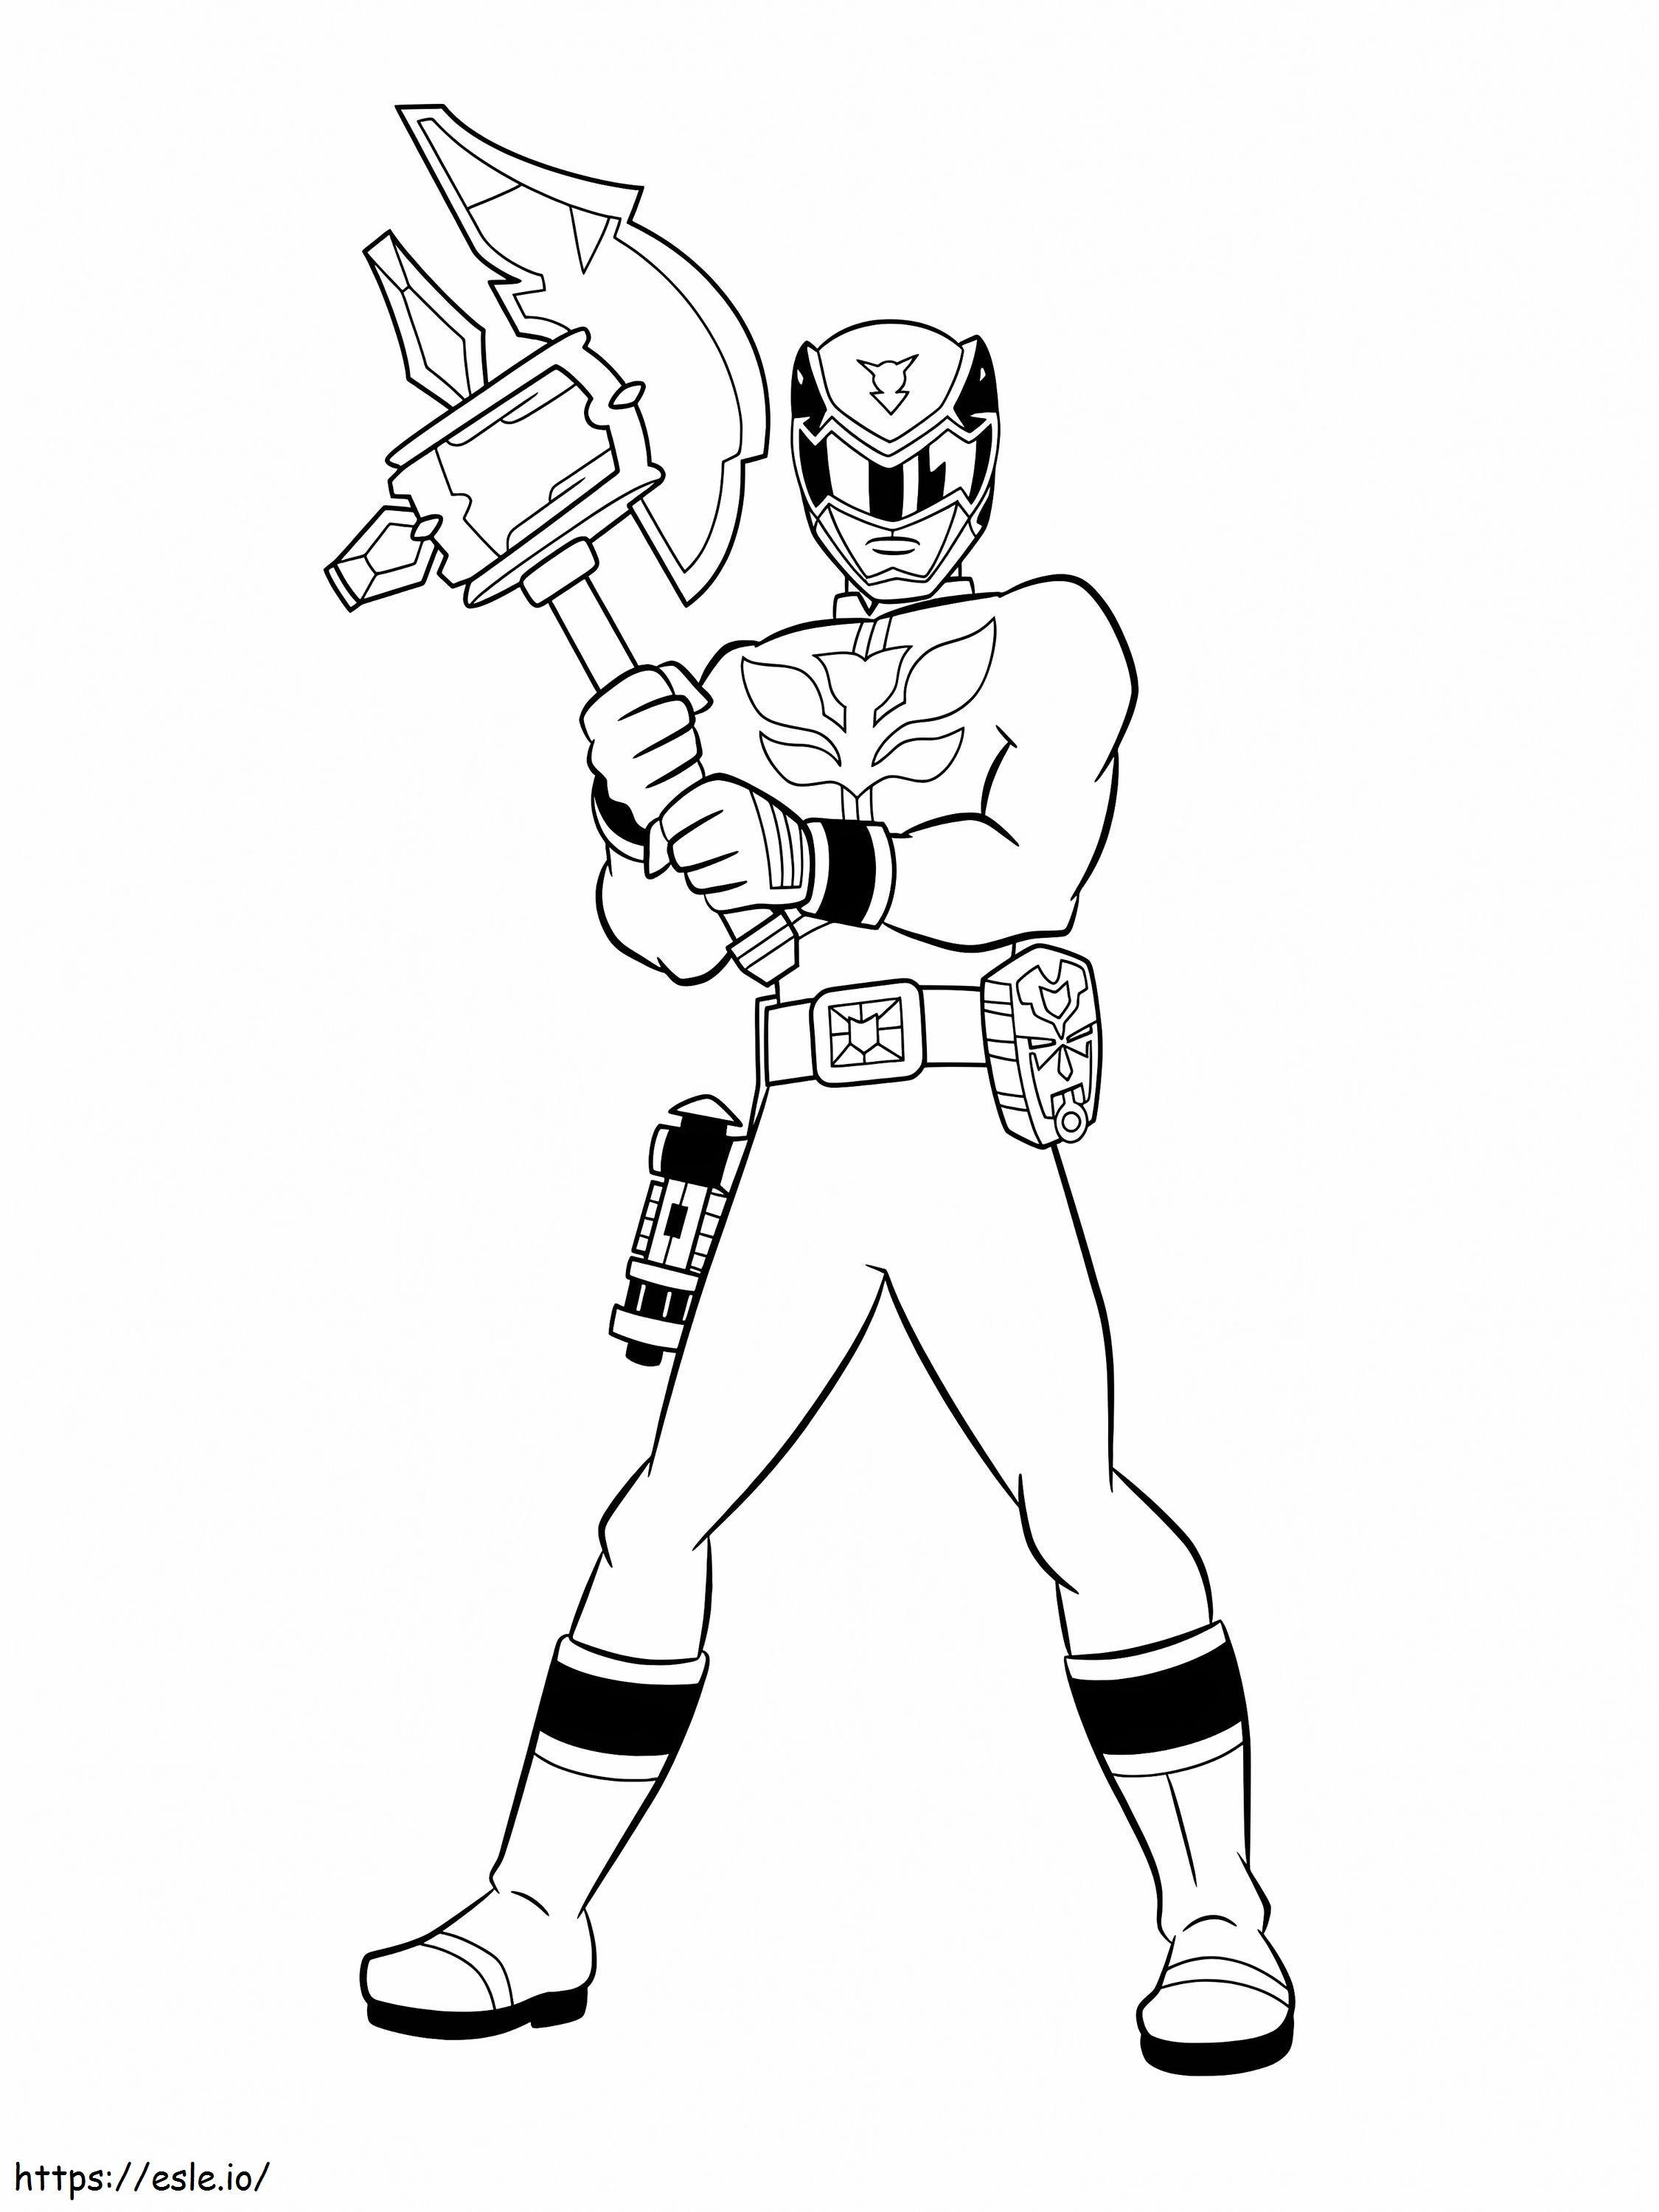 1996 1 coloring page